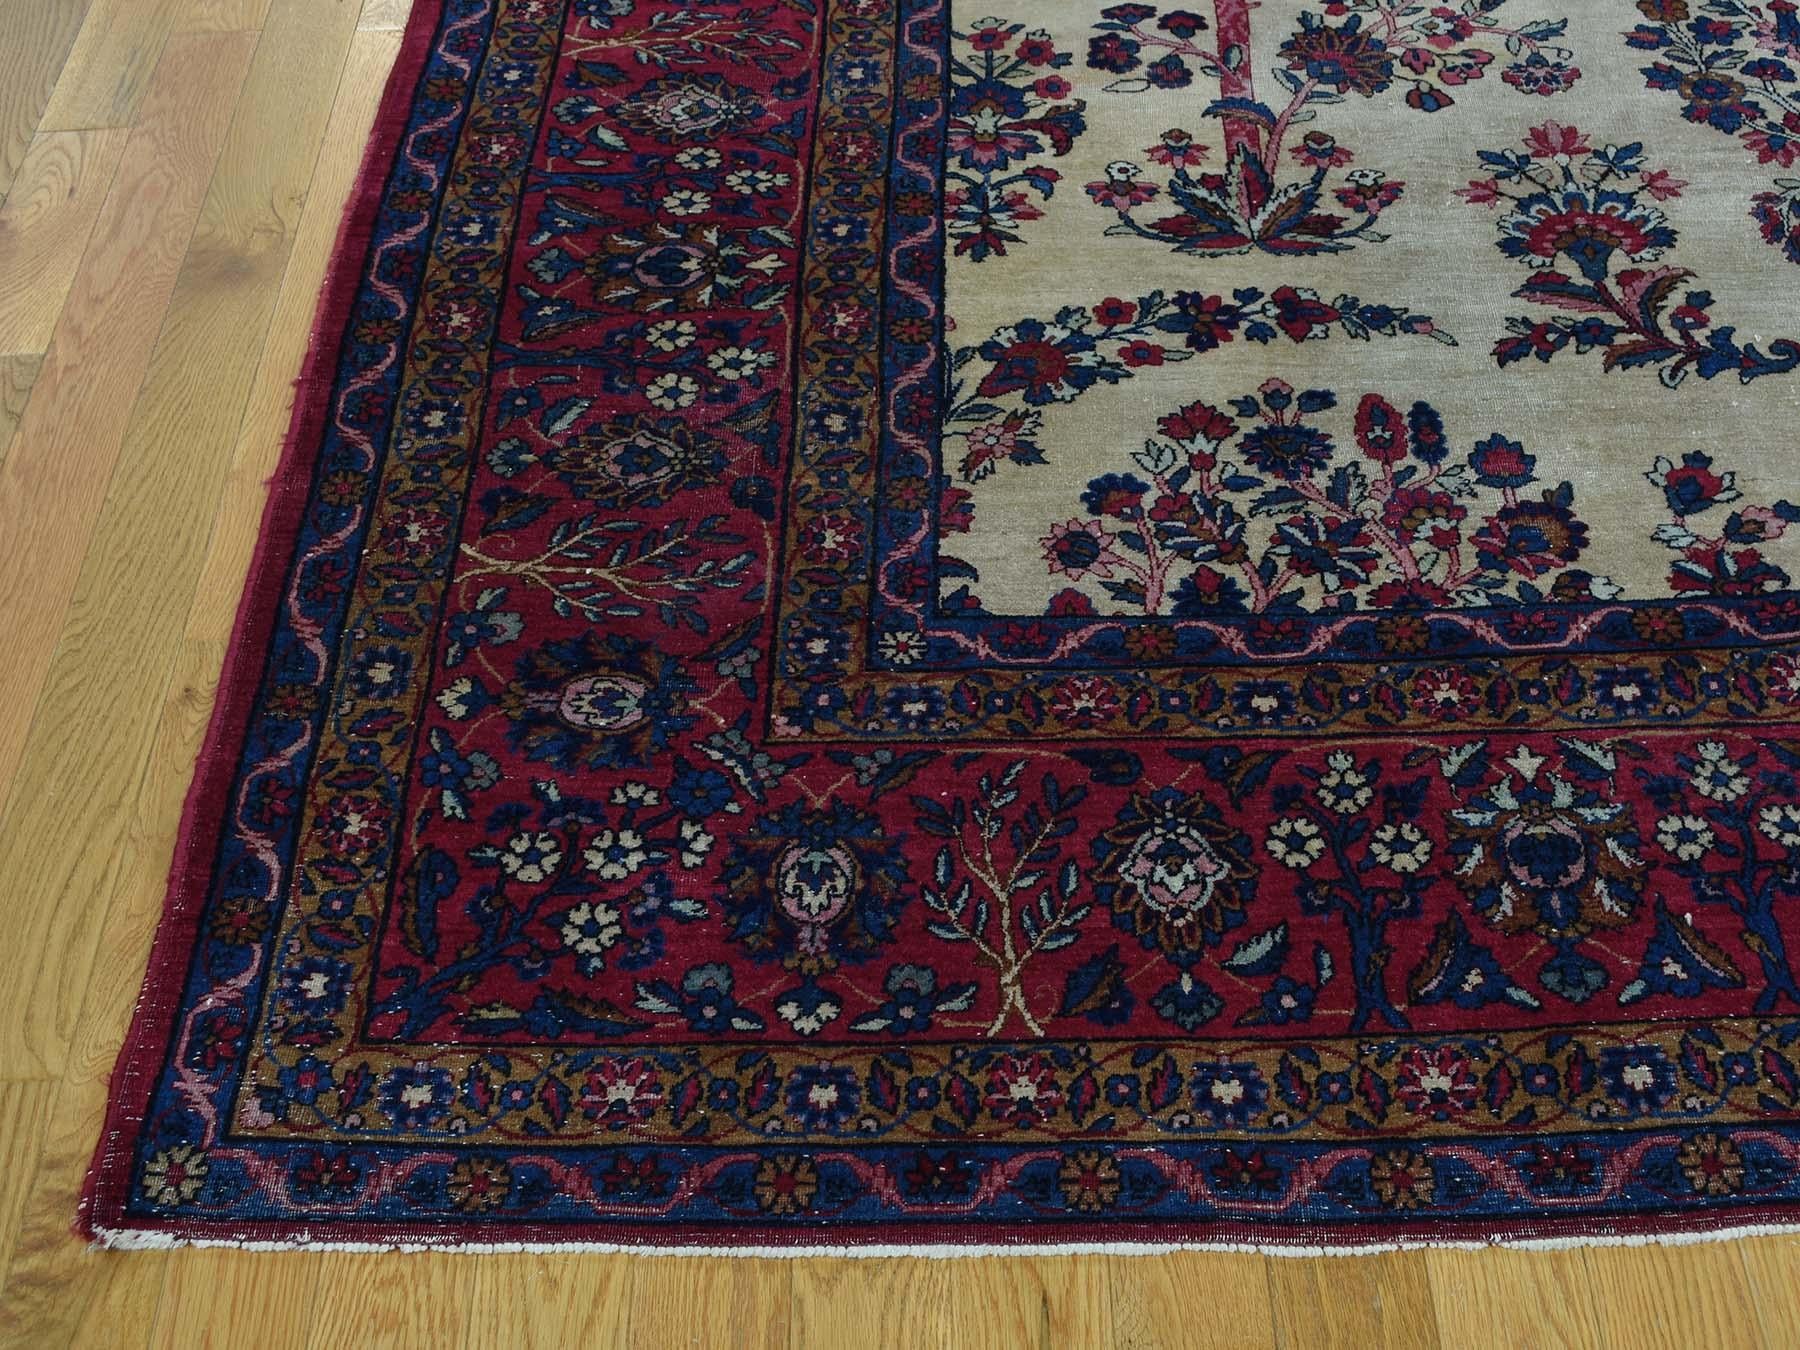 Early 20th Century 1900 Antique Persian Kerman Rug Tree Design All-Over